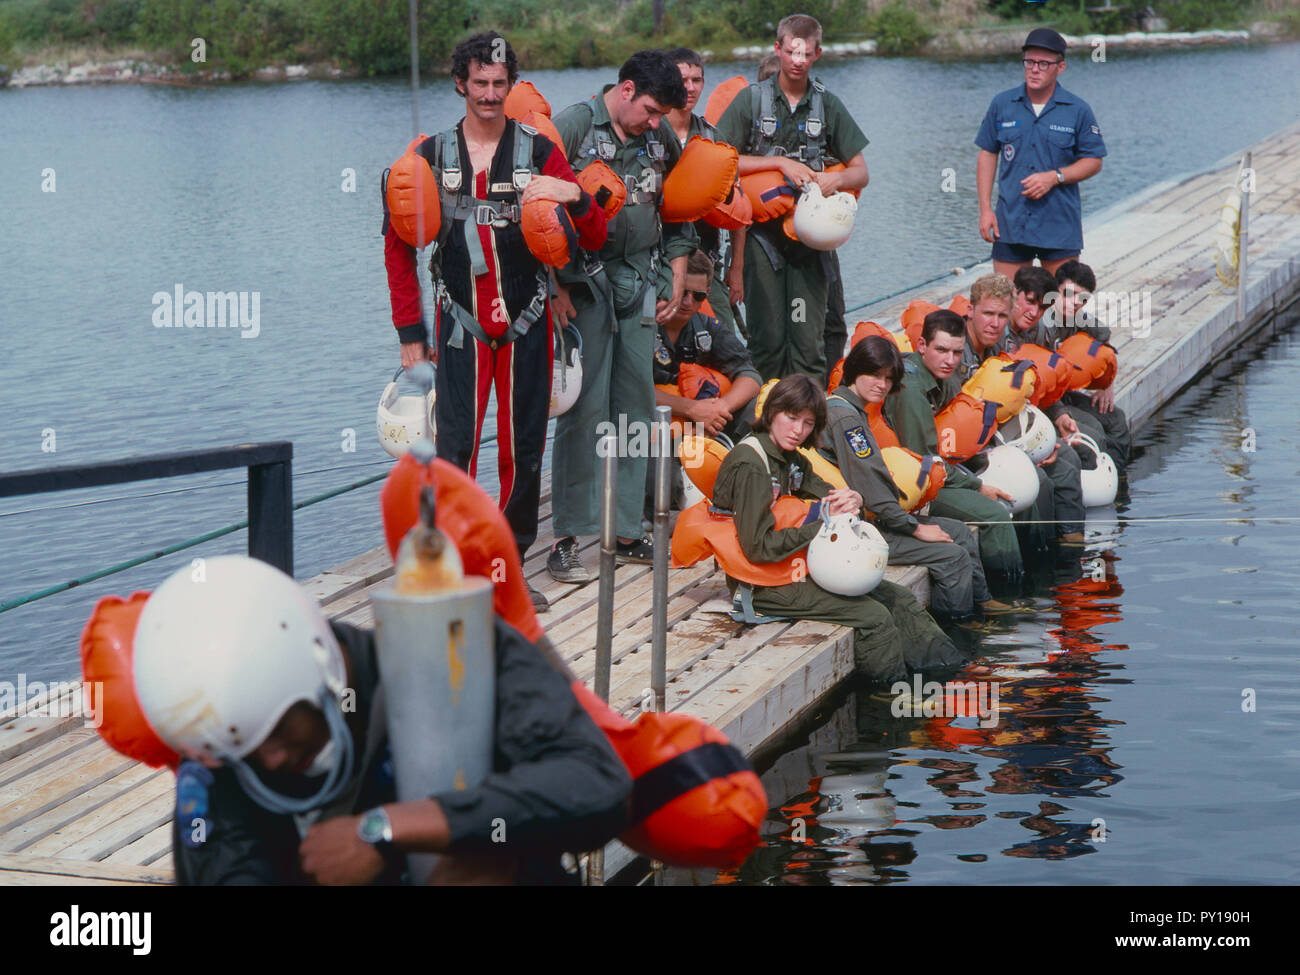 The first female NASA astronauts qualify in Water Survival School at Turkey Point, Florida. Here NASA astronaut candidates Anna L. Fisher and Sally Ride sit among their male classmates as they await their turn in a helicopter water pickup exercise. Stock Photo